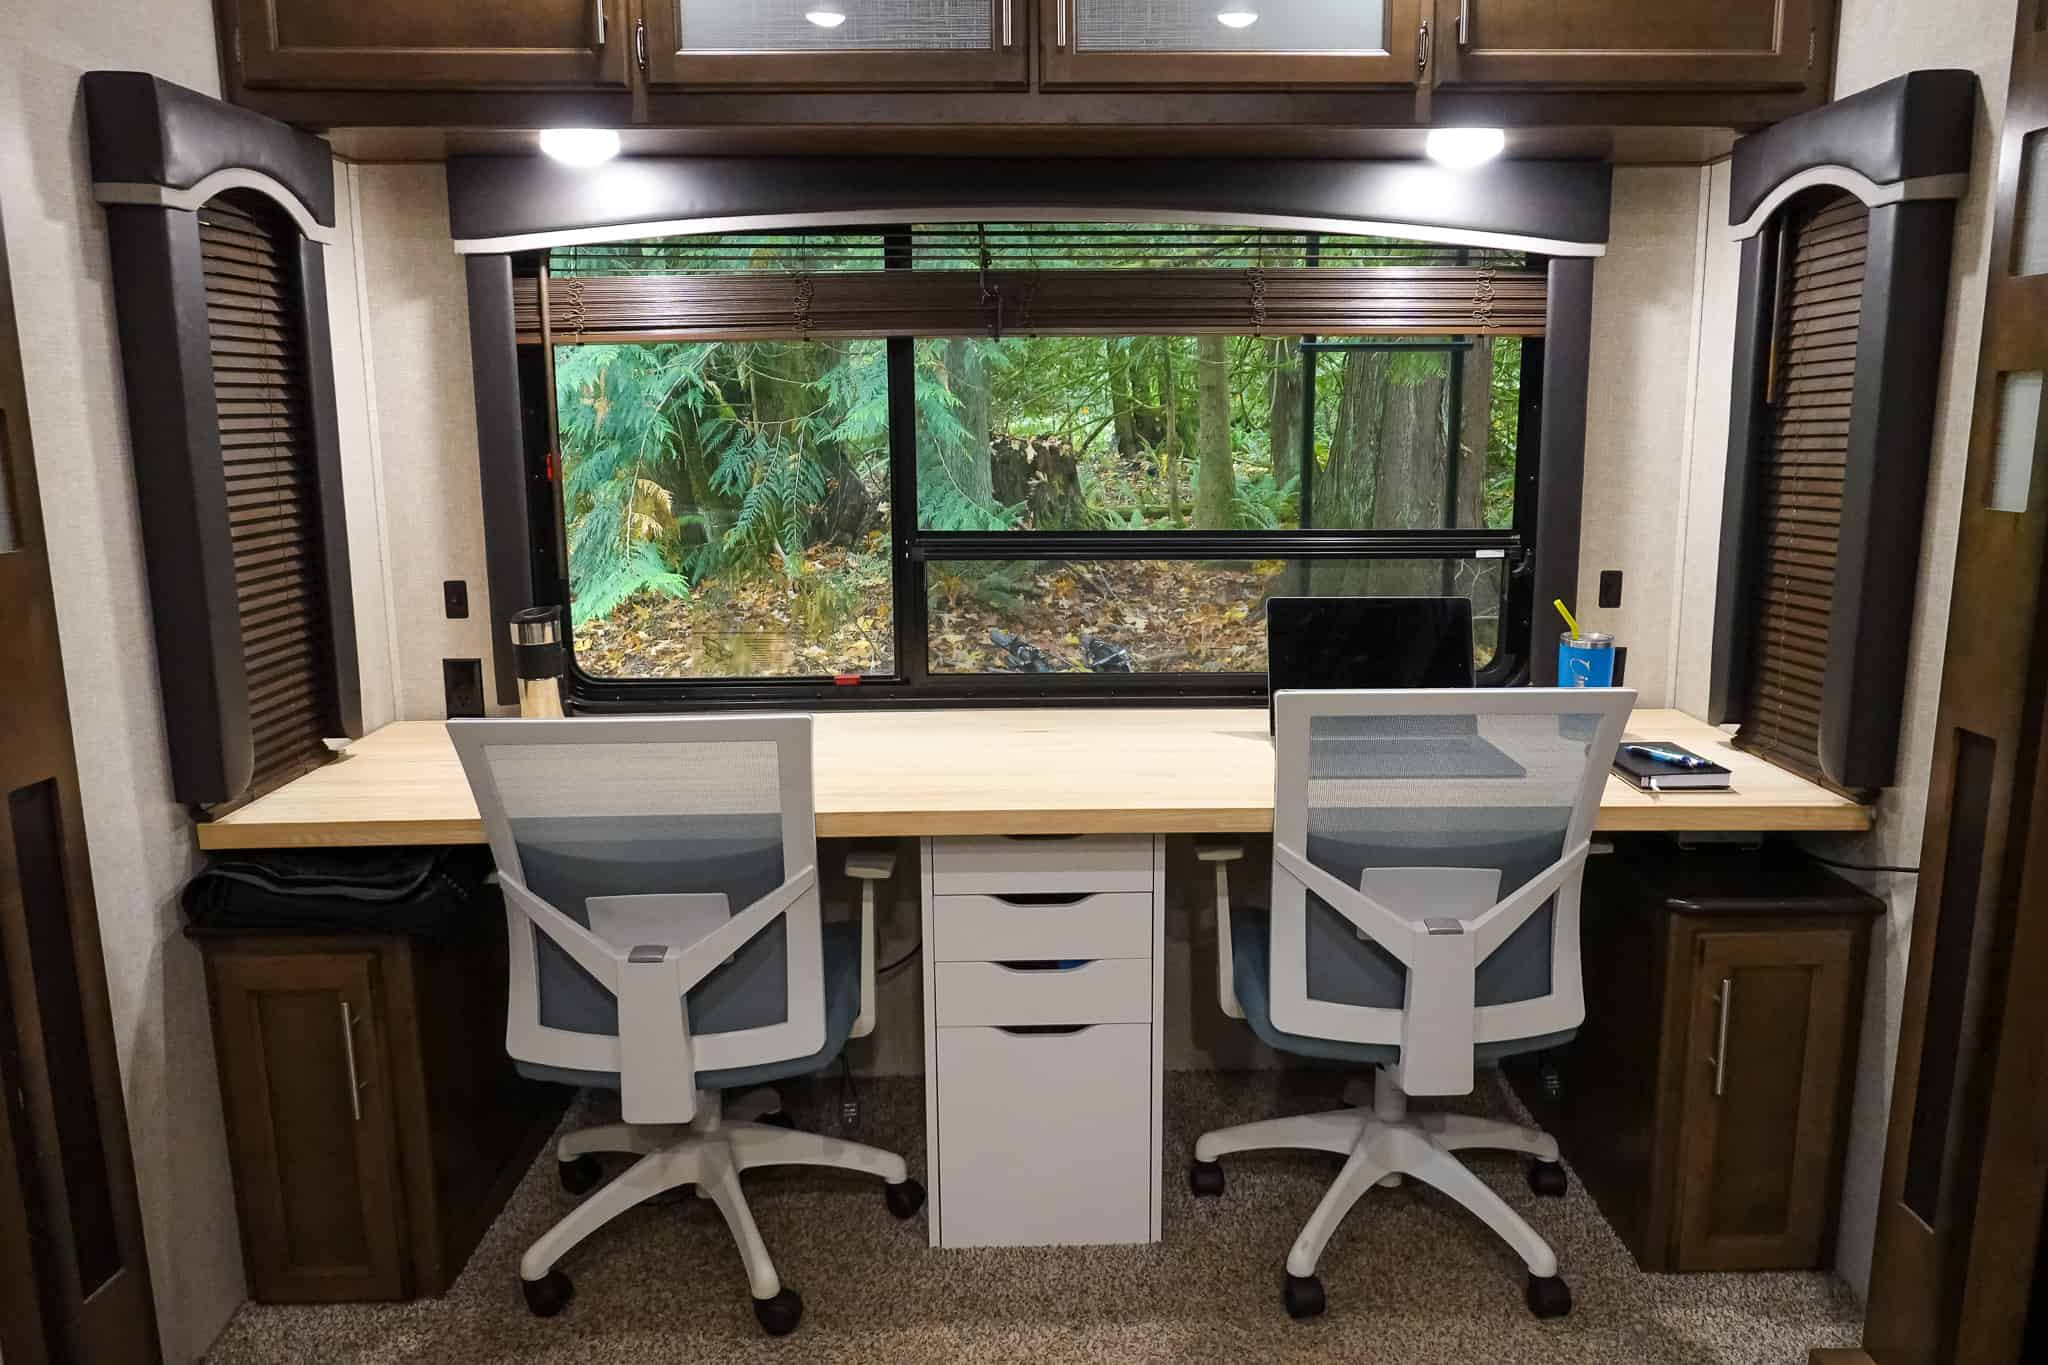 Office Chairs added to RV Desk Renovation